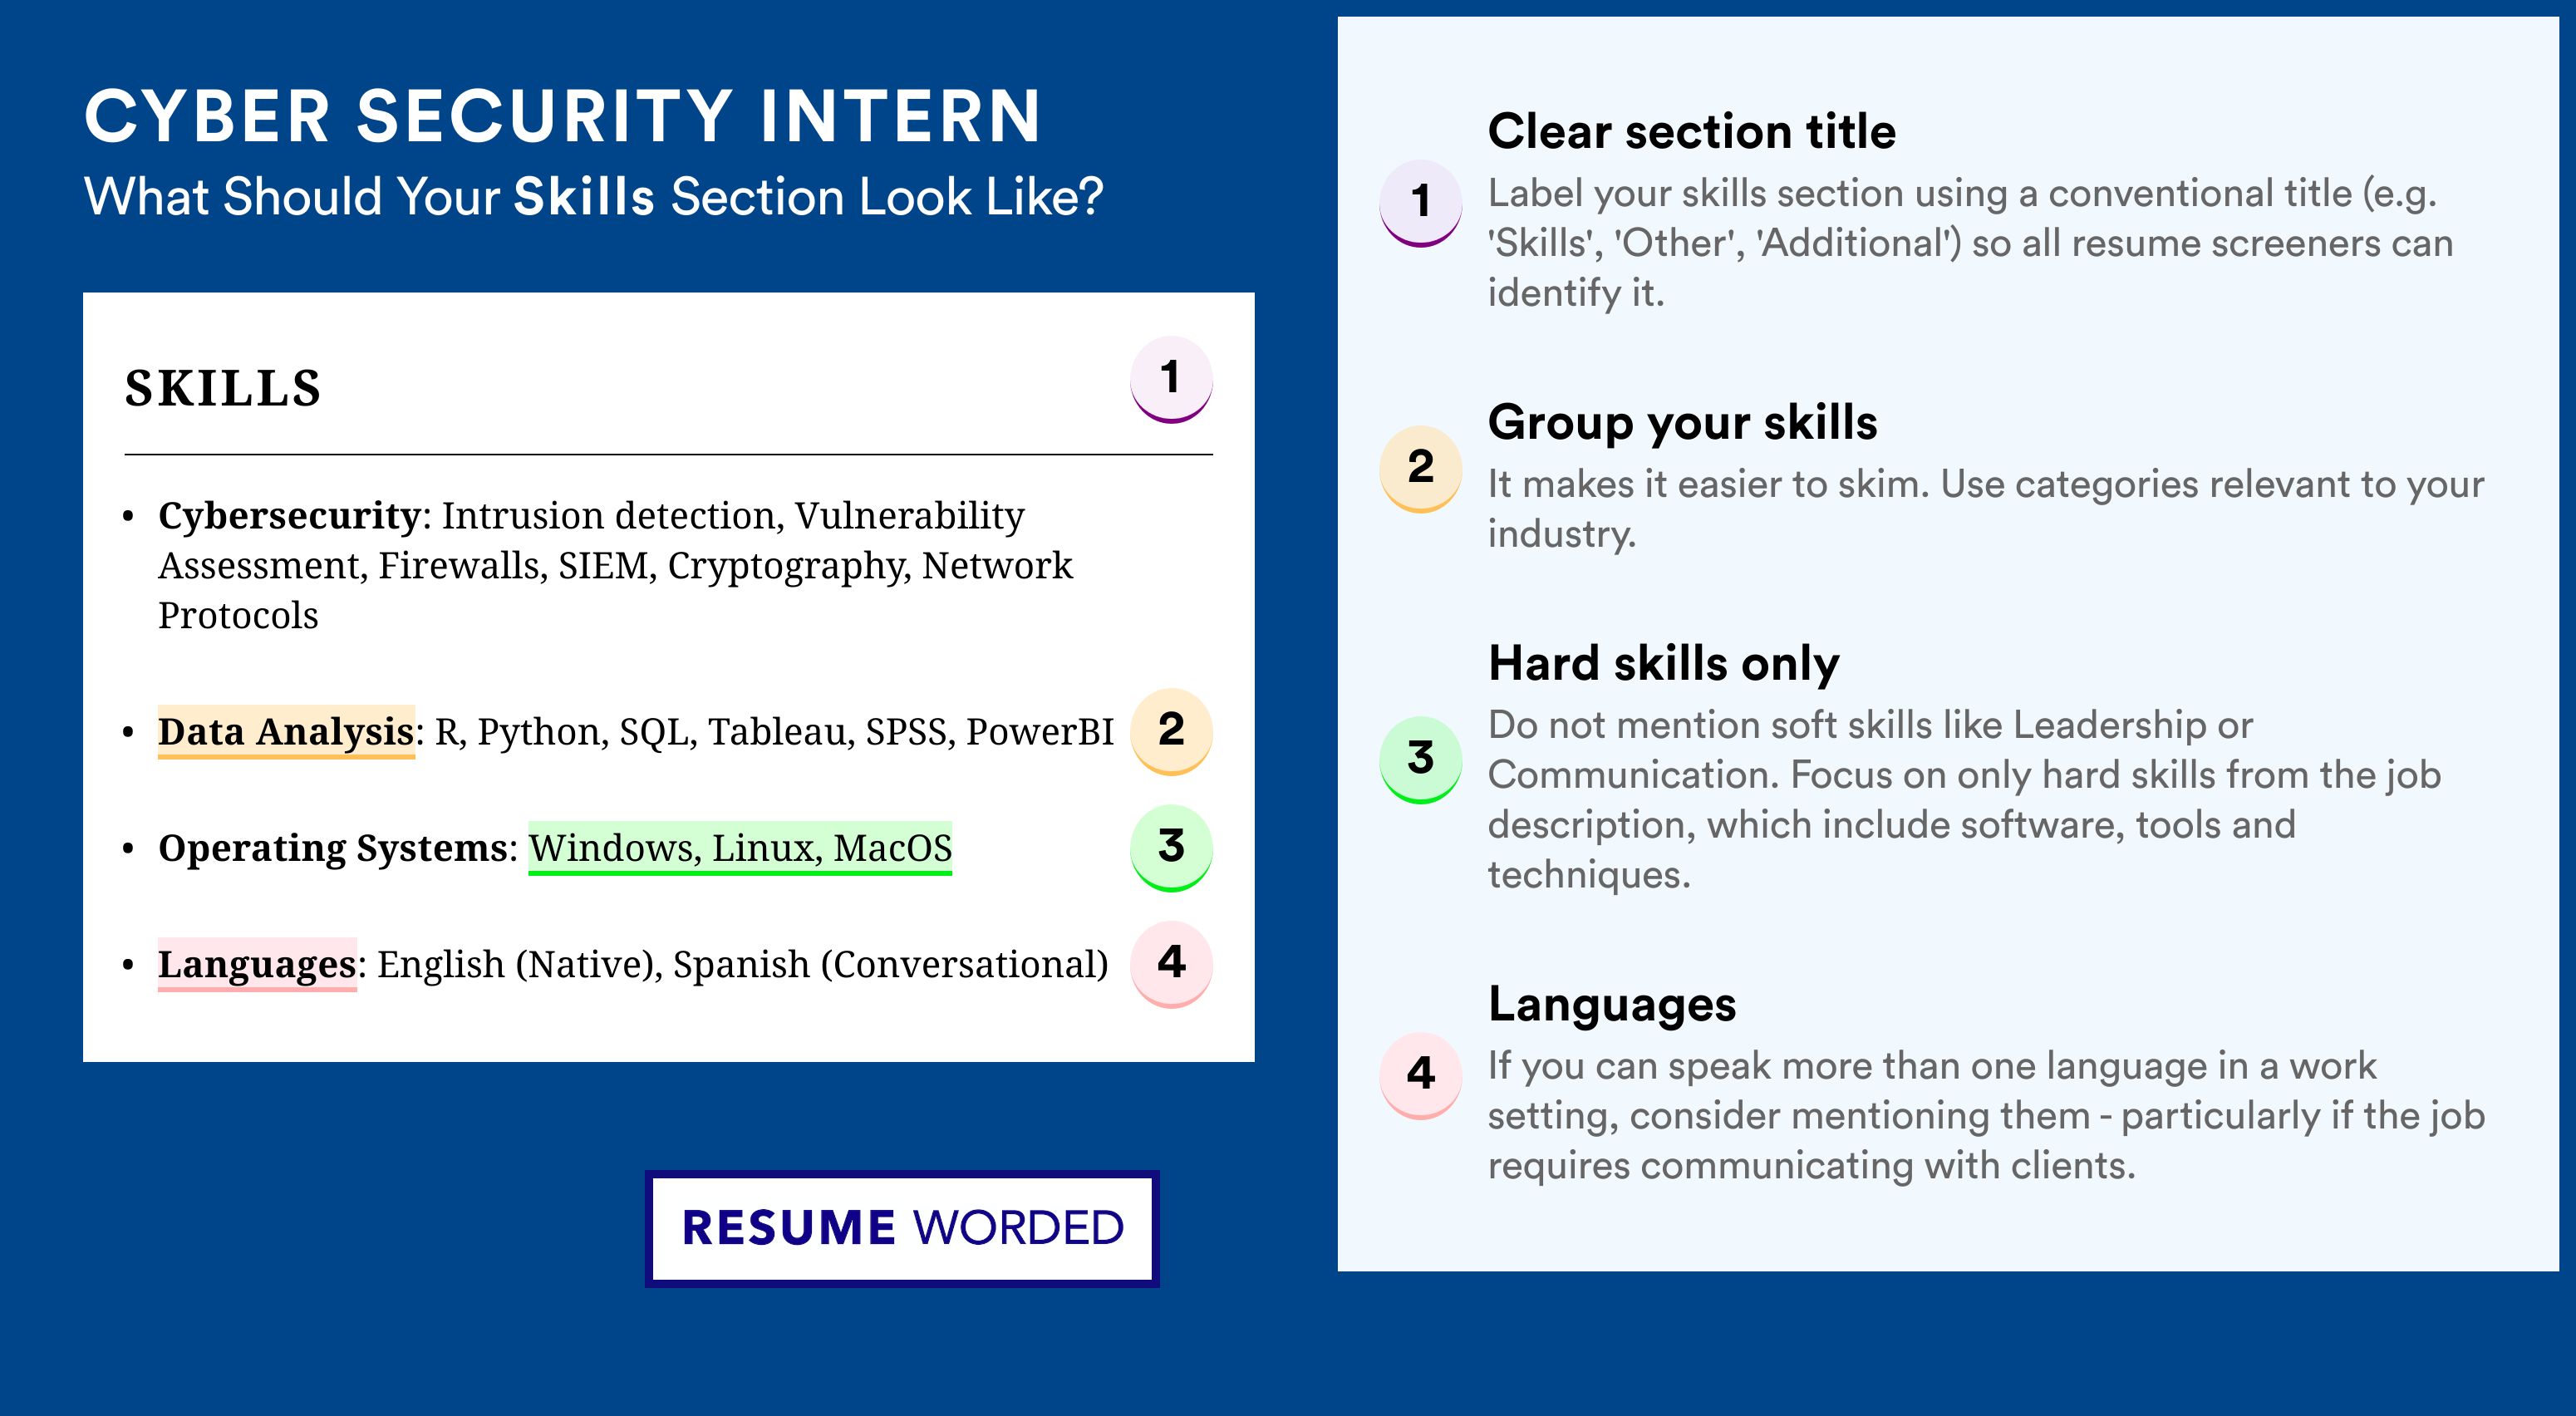 How To Write Your Skills Section - Cyber Security Intern Roles